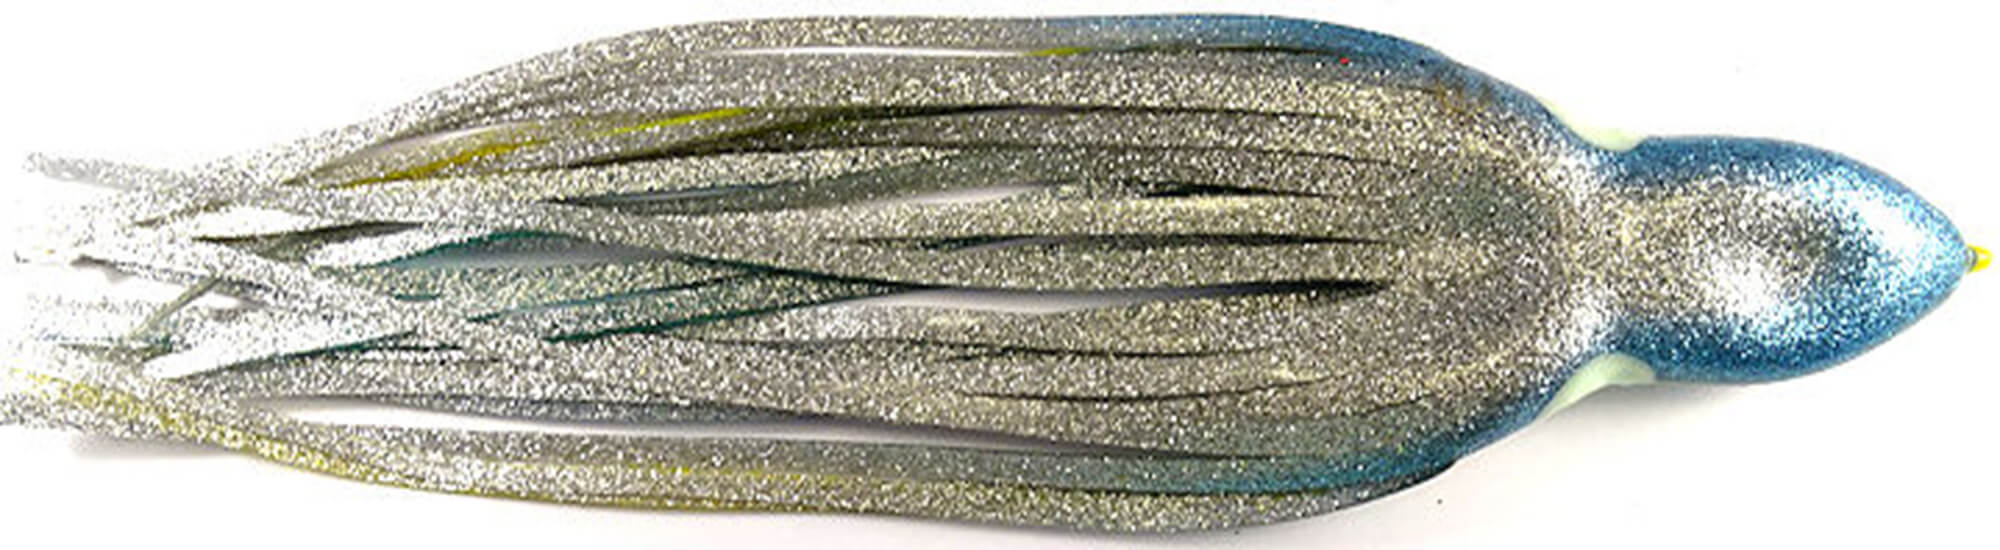 Yo-Zuri Skirts - Huge range available for trolling lures